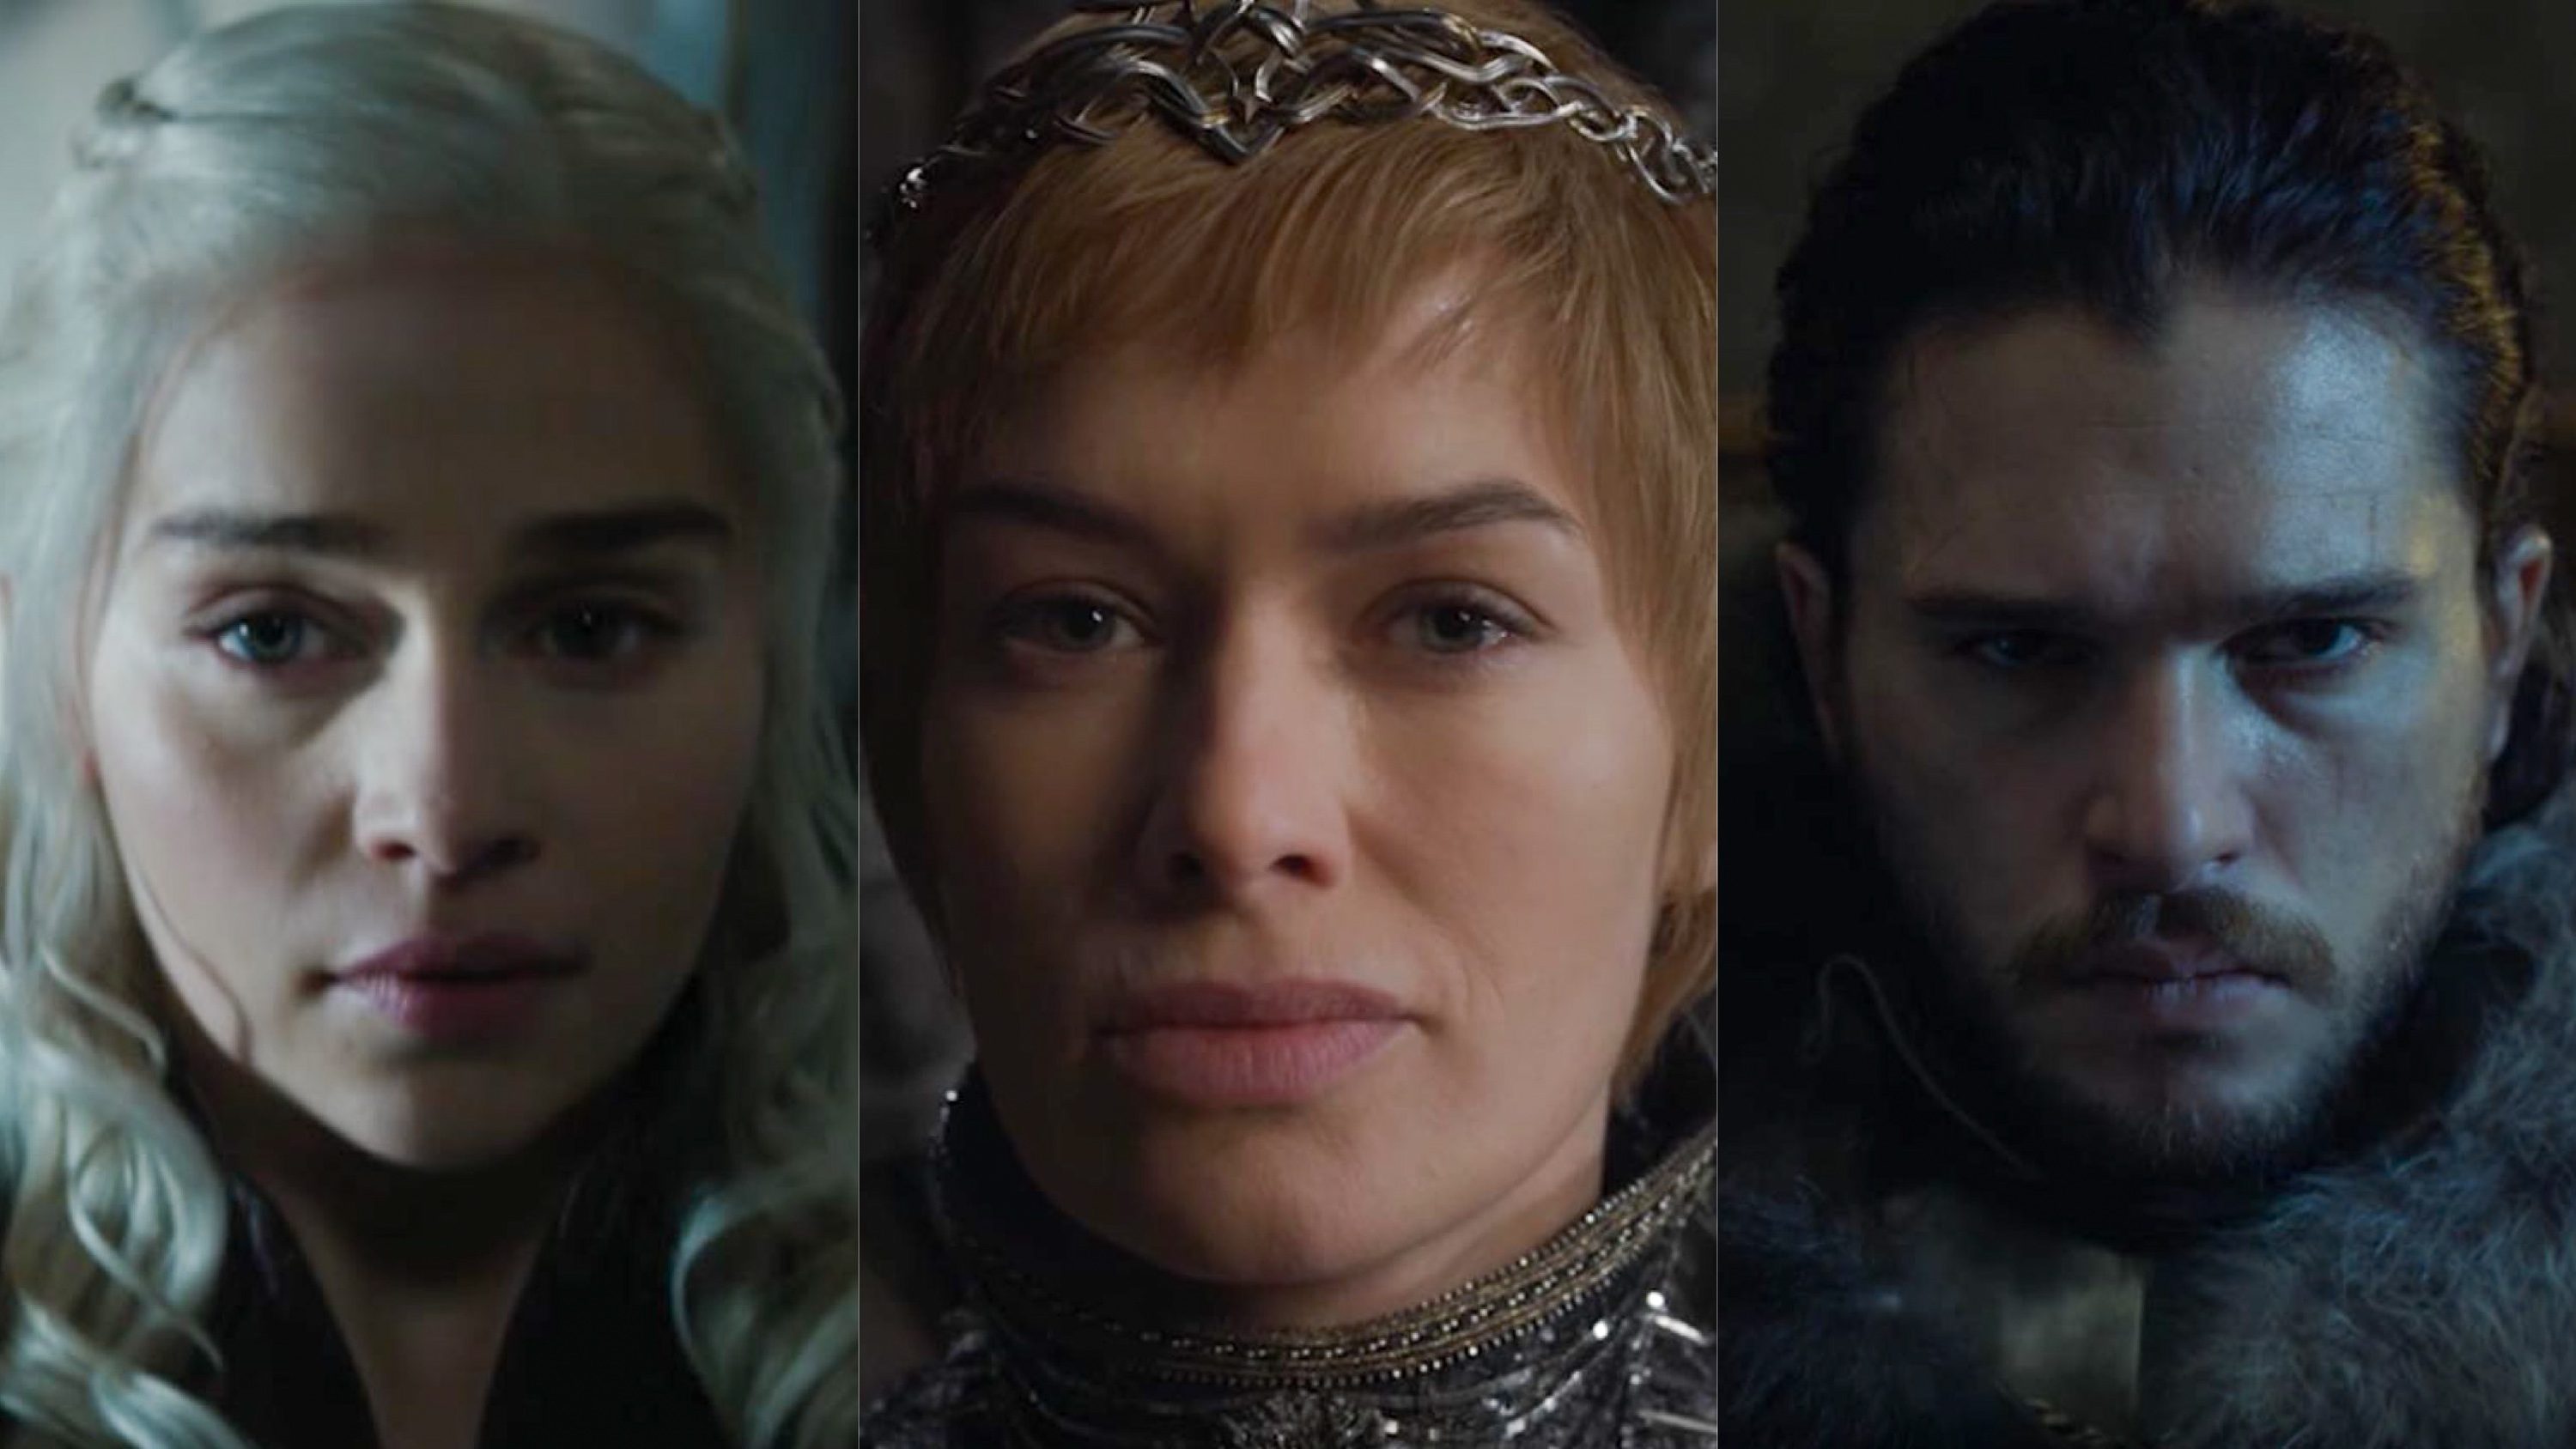 Screengrabs from YouTube/GameofThrones  